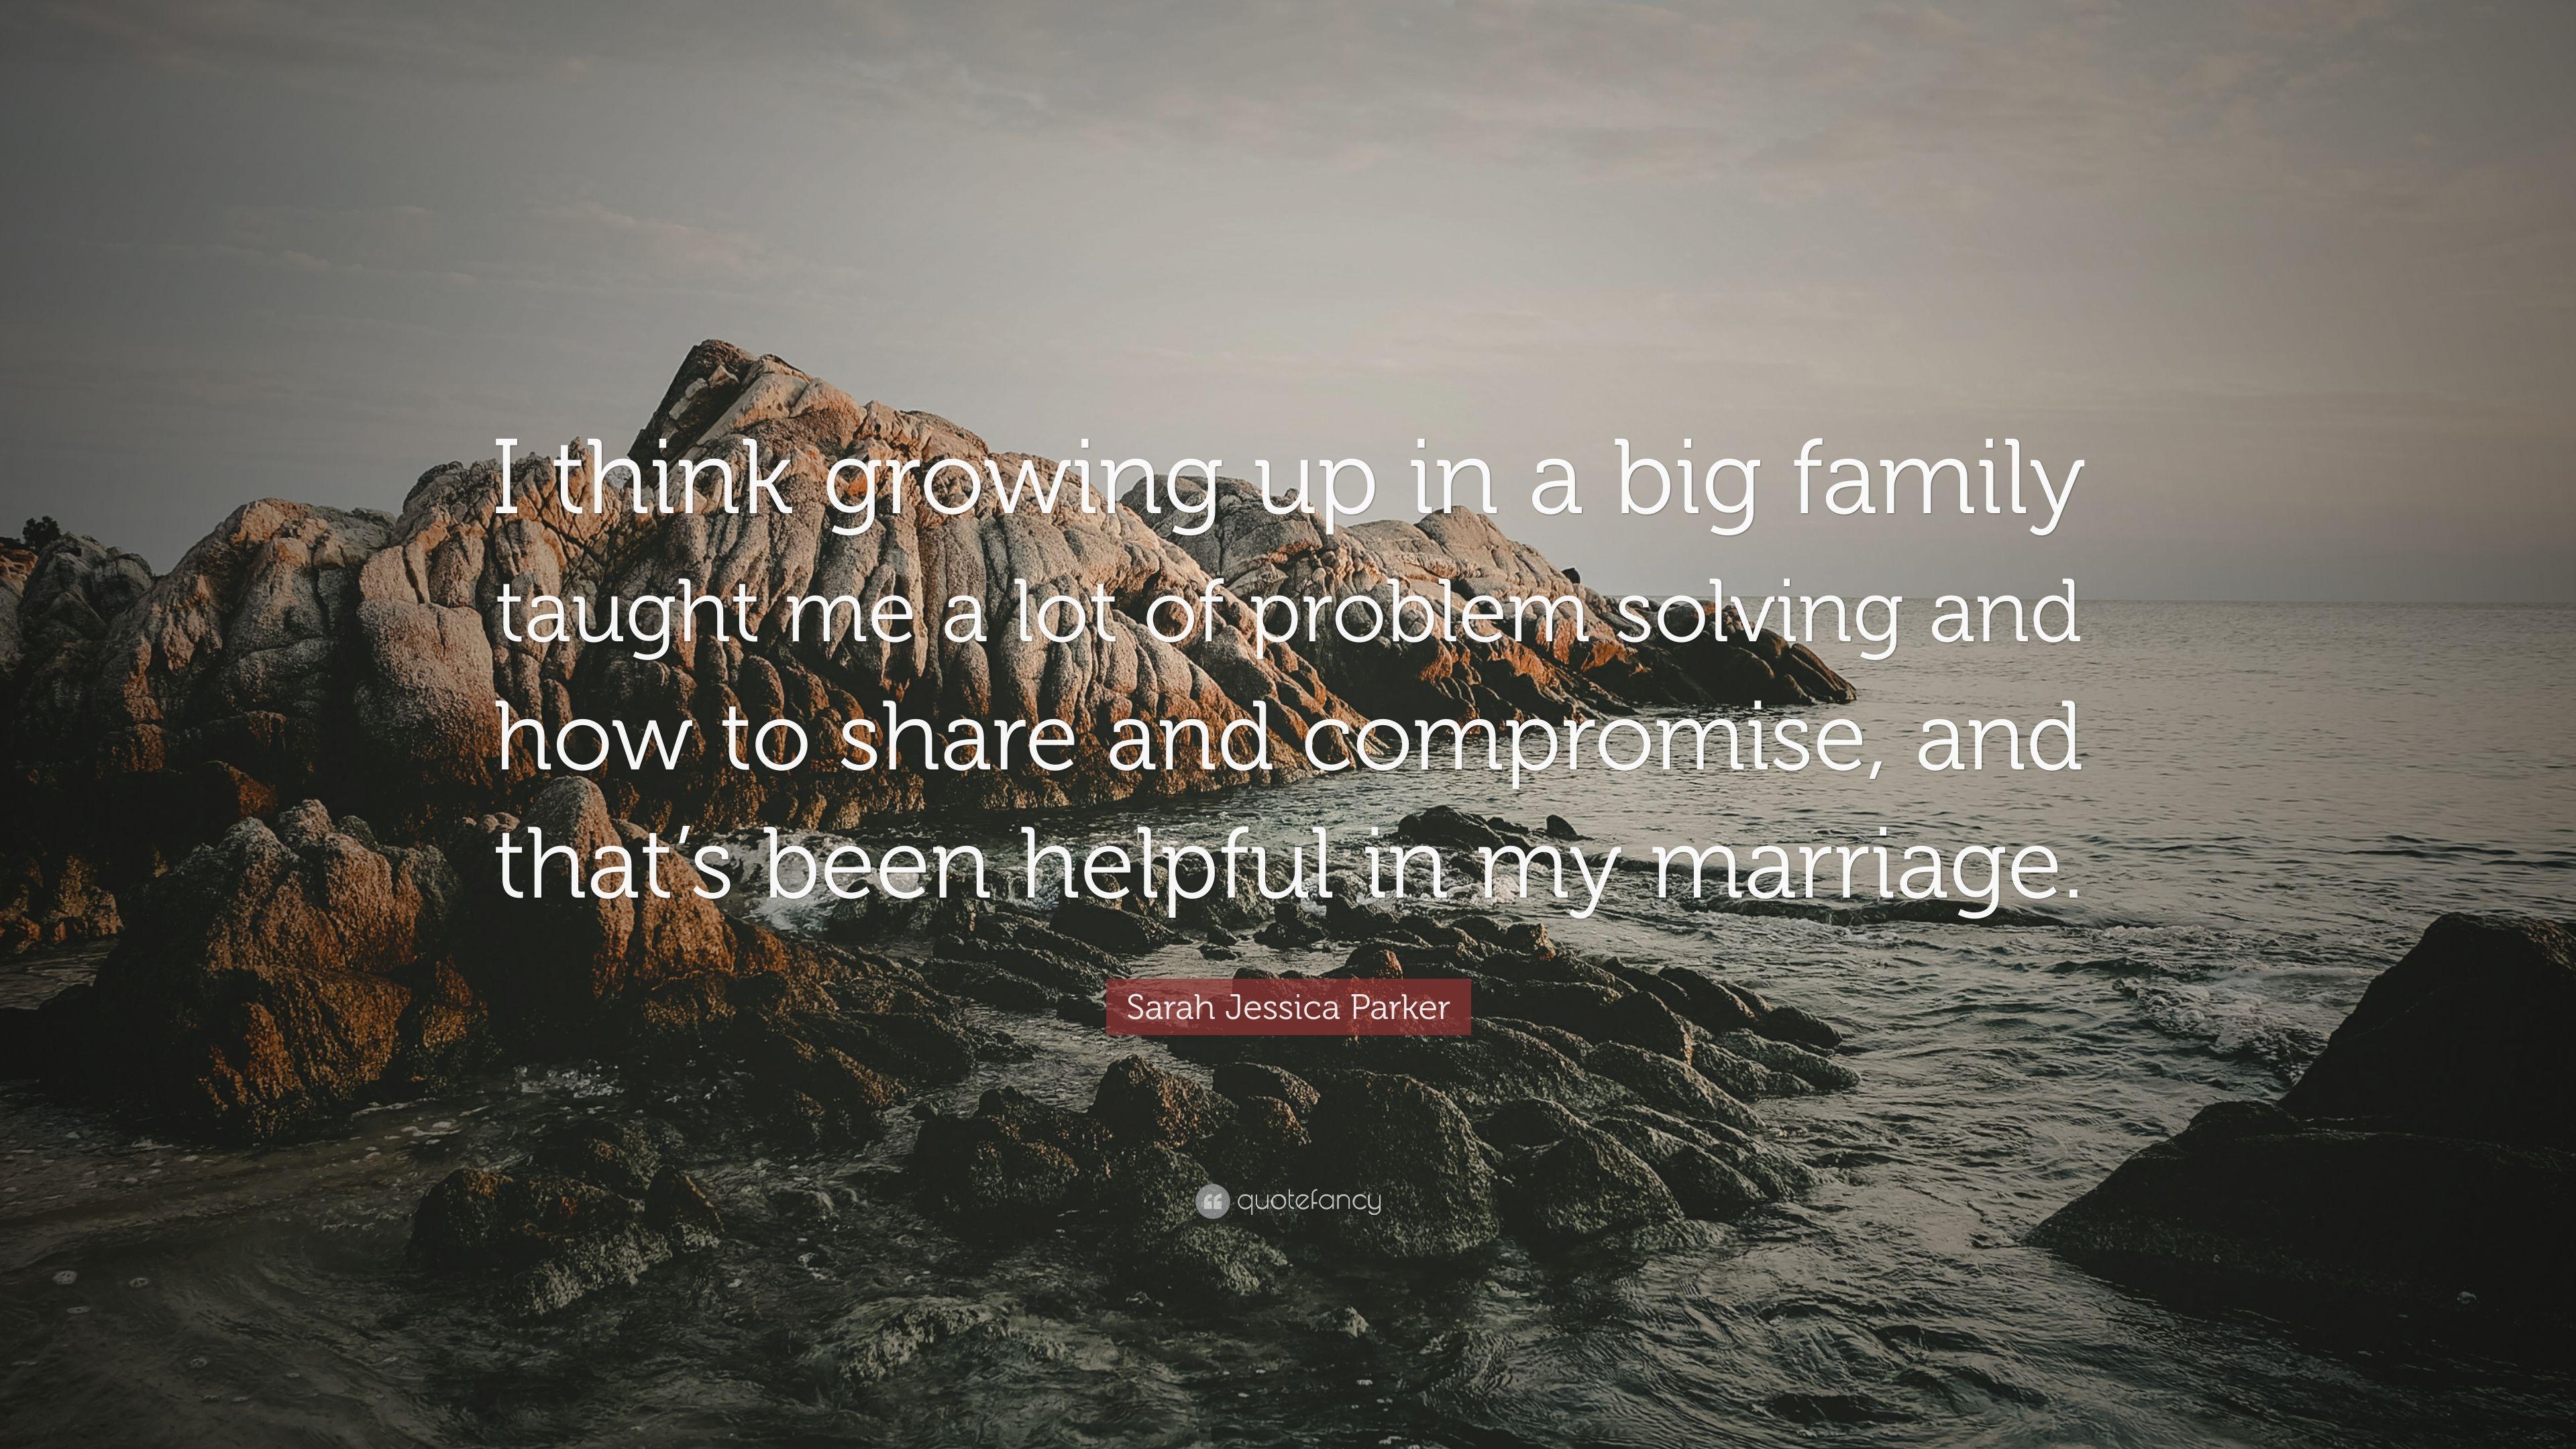 Sarah Jessica Parker Quote: “I think growing up in a big